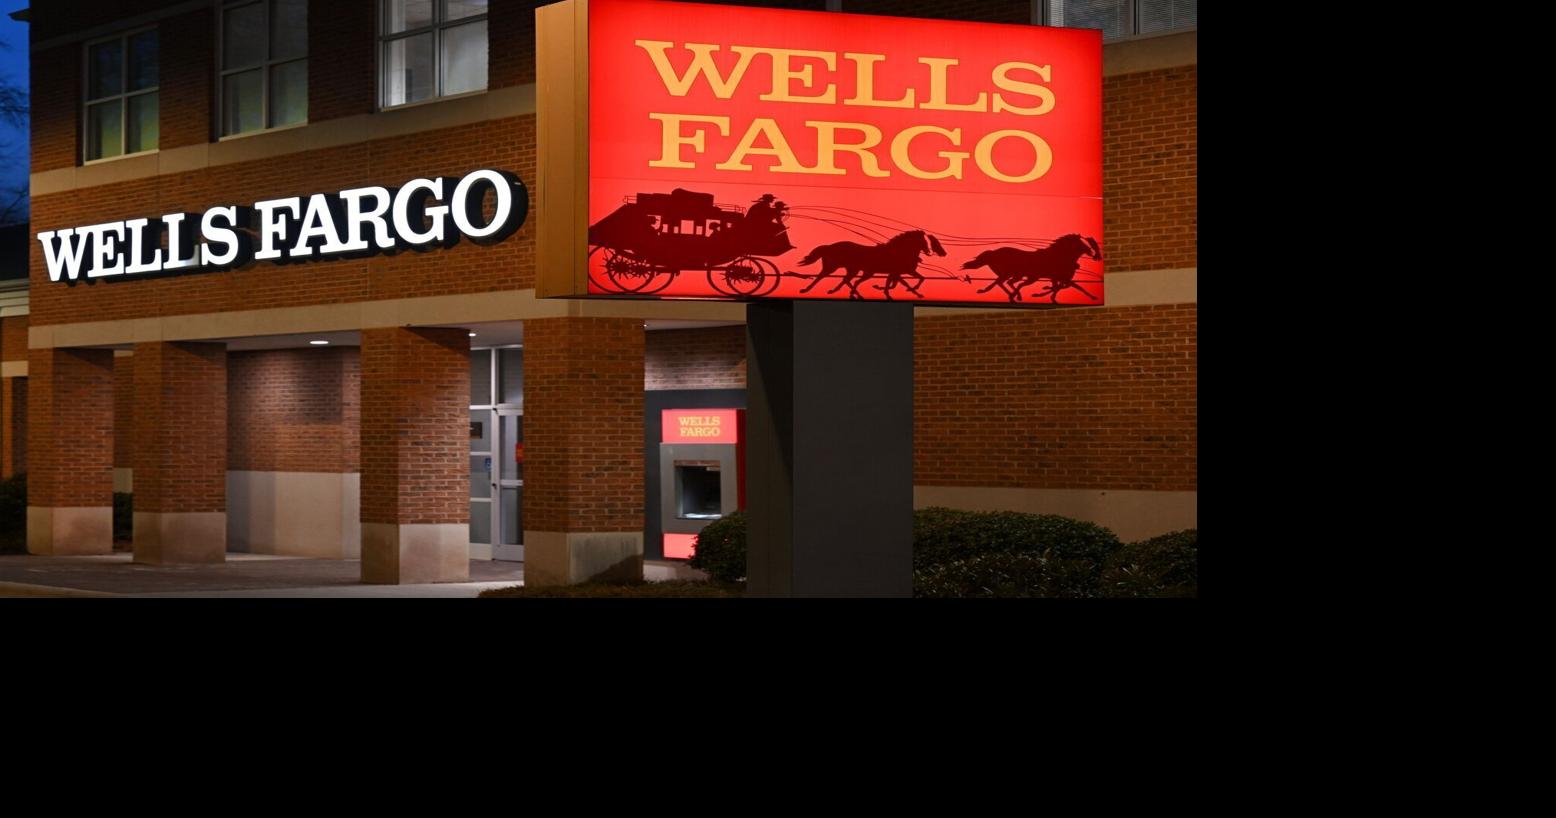 Sports betting will soon be welcomed at Wells Fargo Center lounges